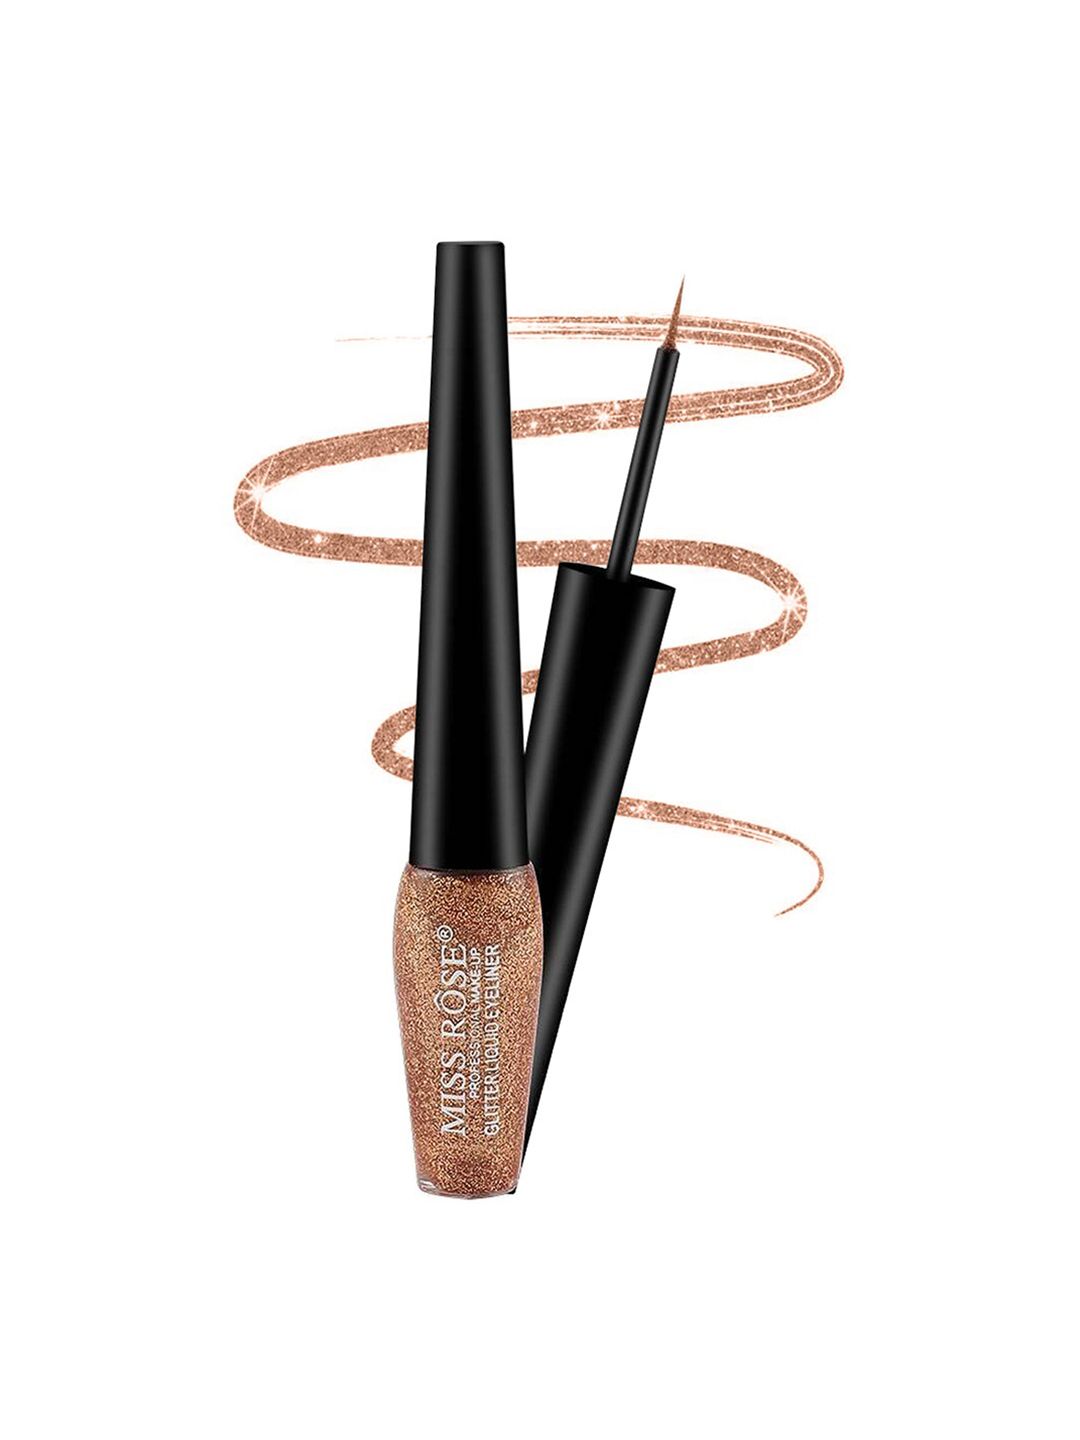 MISS ROSE Copper-Toned Professional Glitter Liquid Eye Liner - 09 Price in India